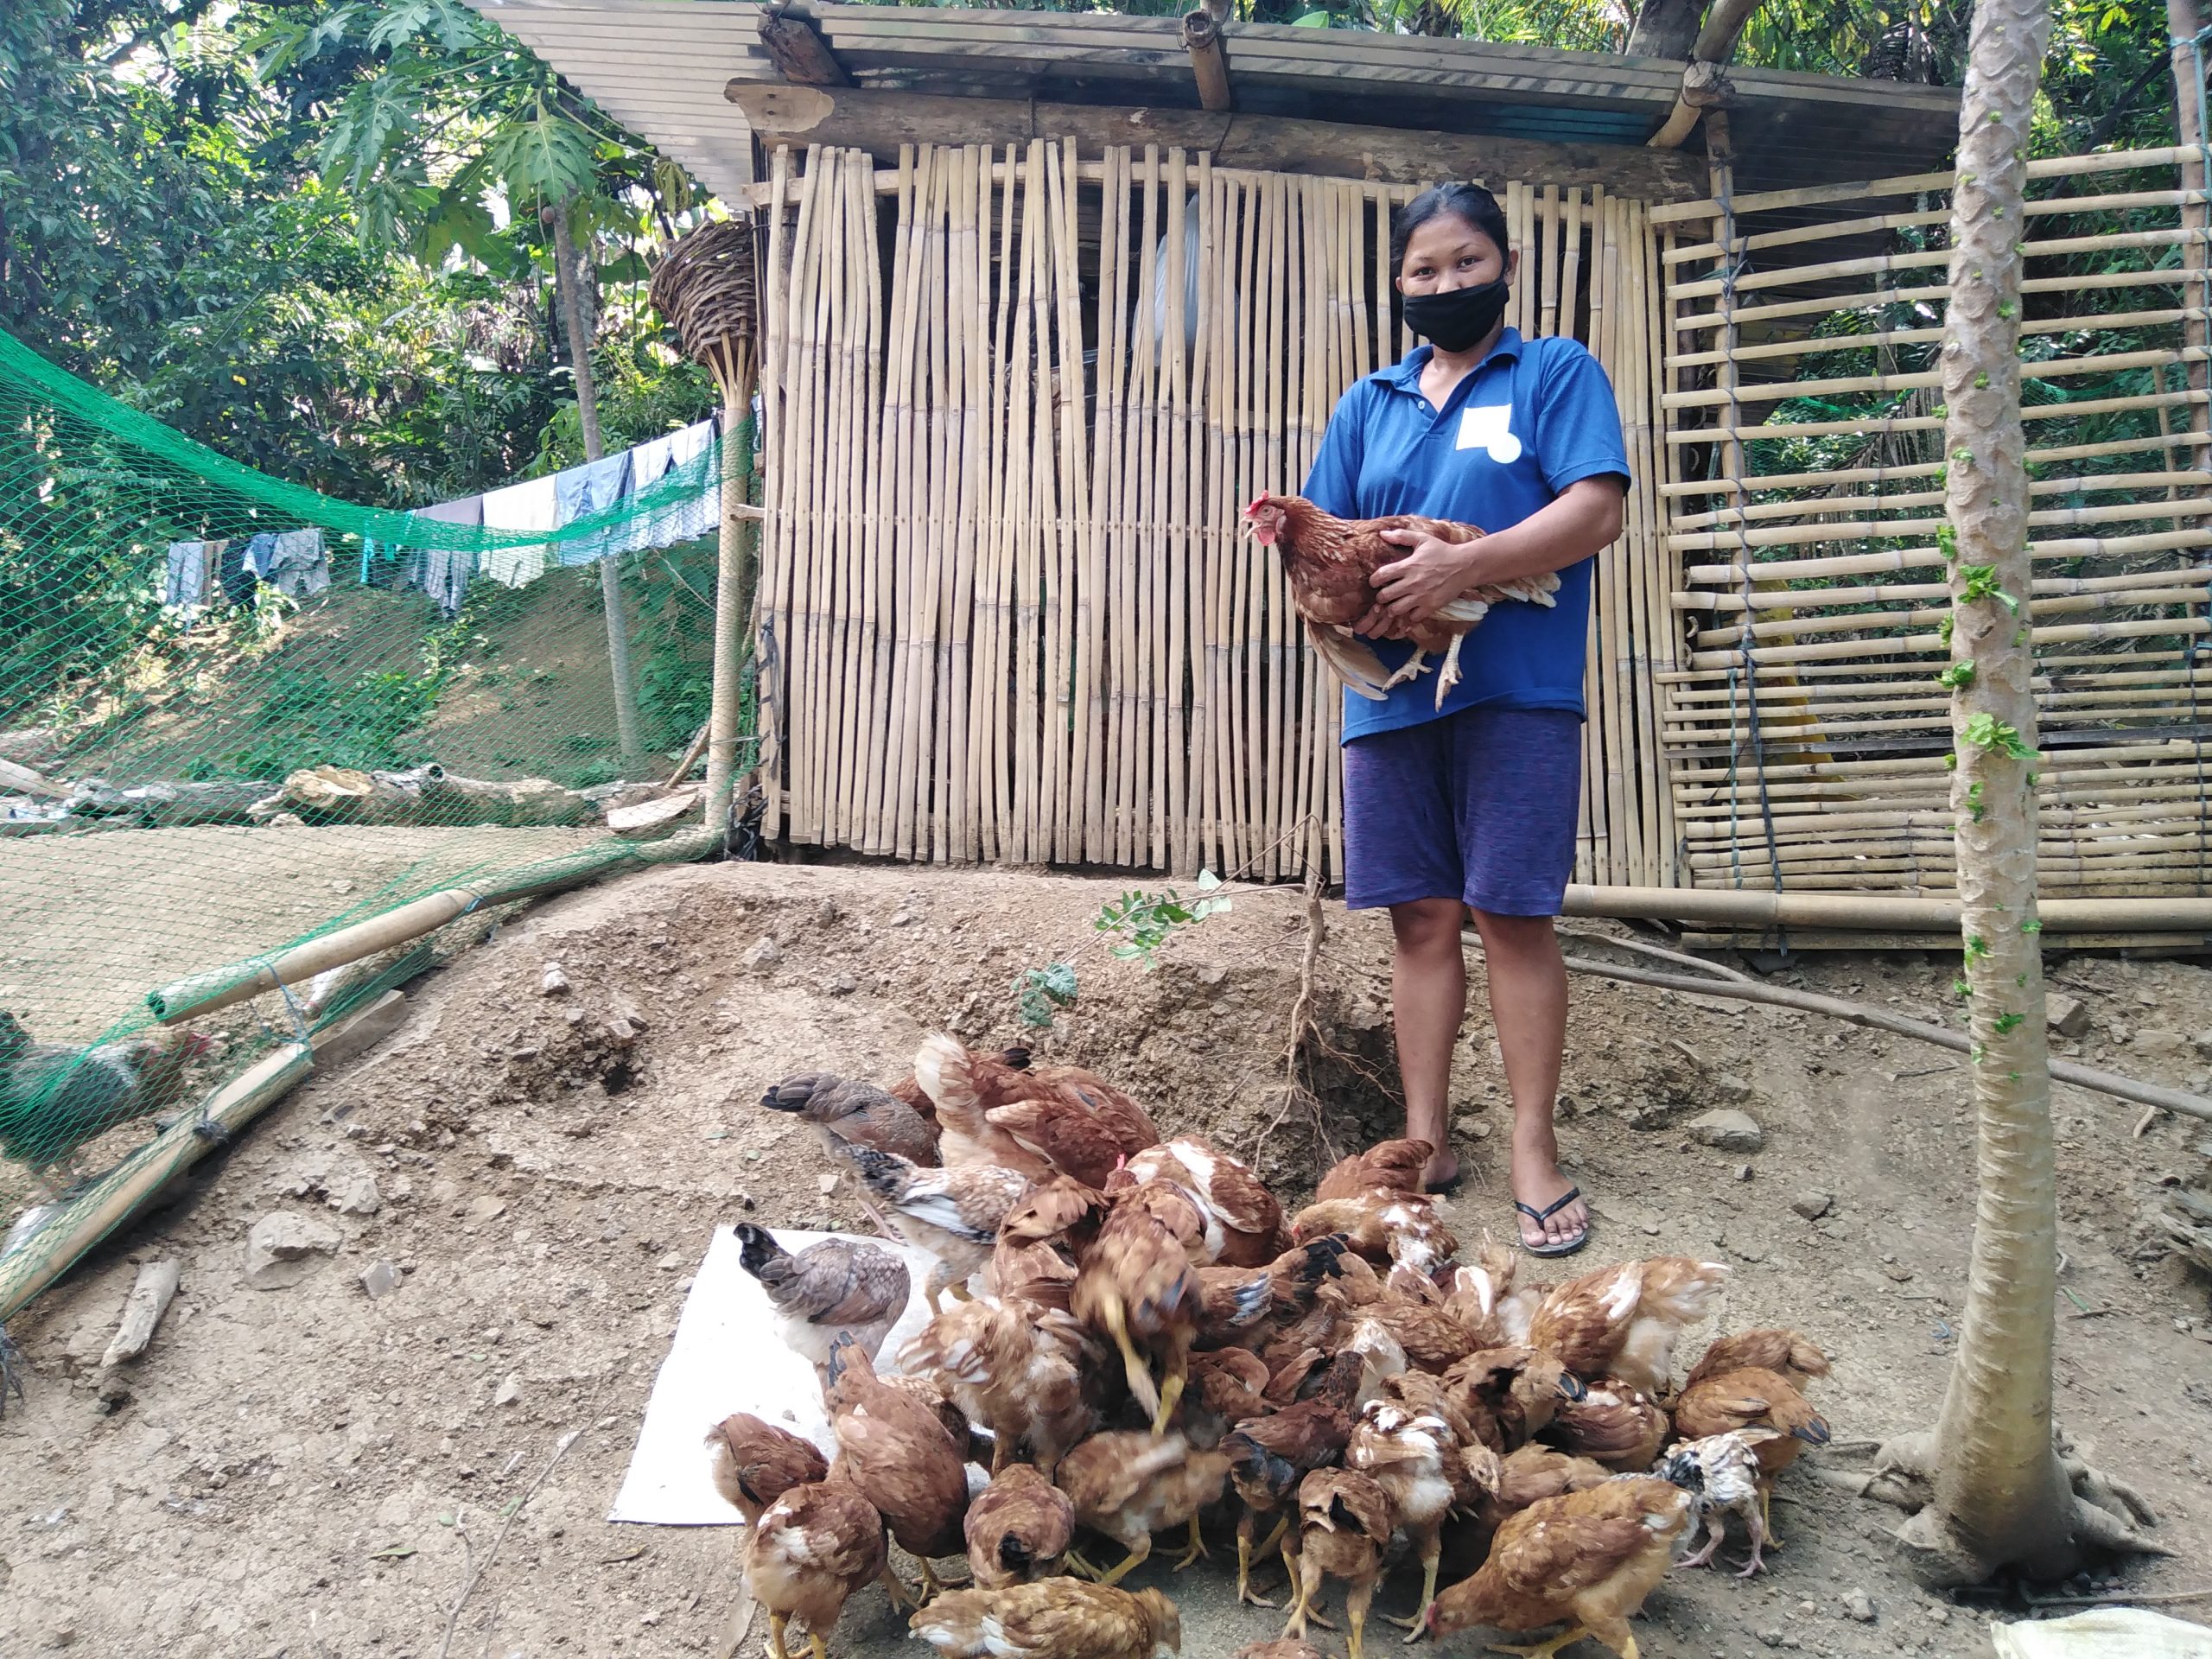 Tanudan woman-farmer started egg and chicken production enterprise